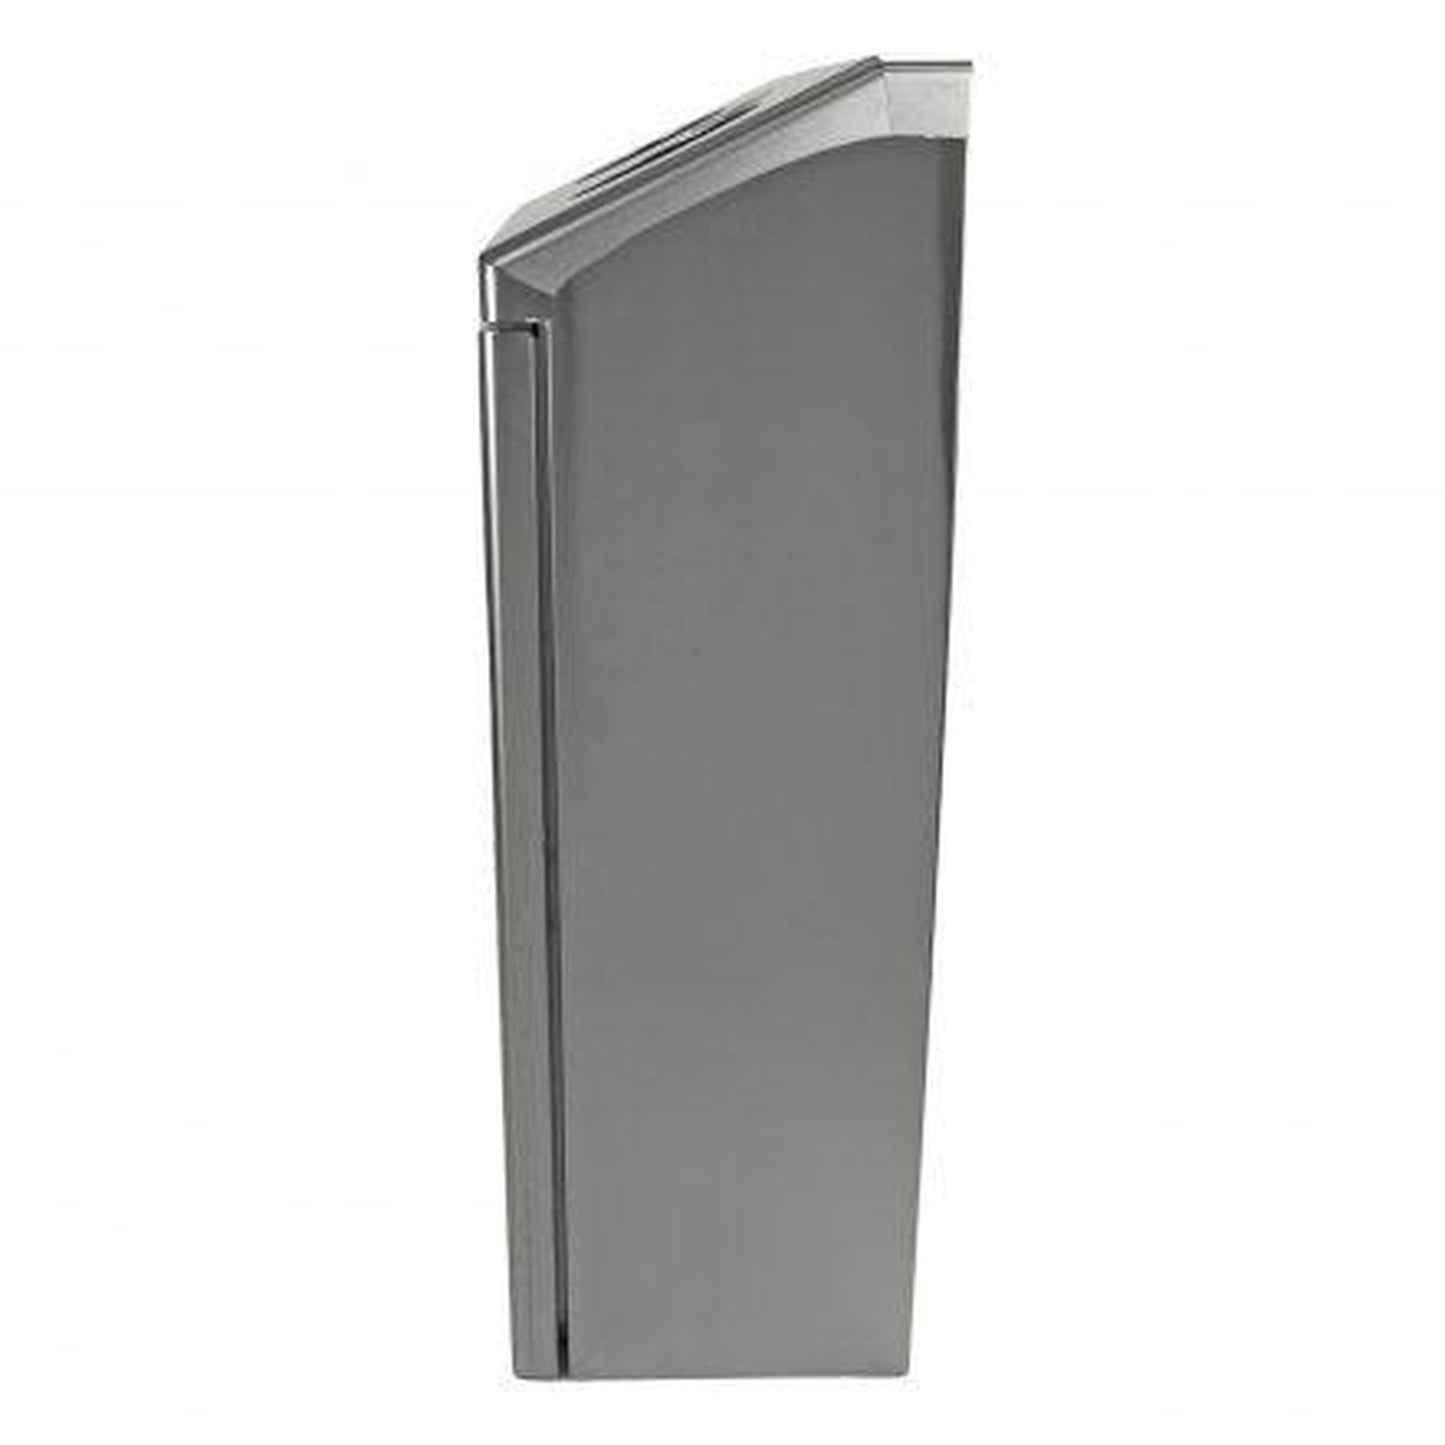 Frost 26.4 x 12.2 x 38.4 Stainless Steel Satin Waste Receptacles